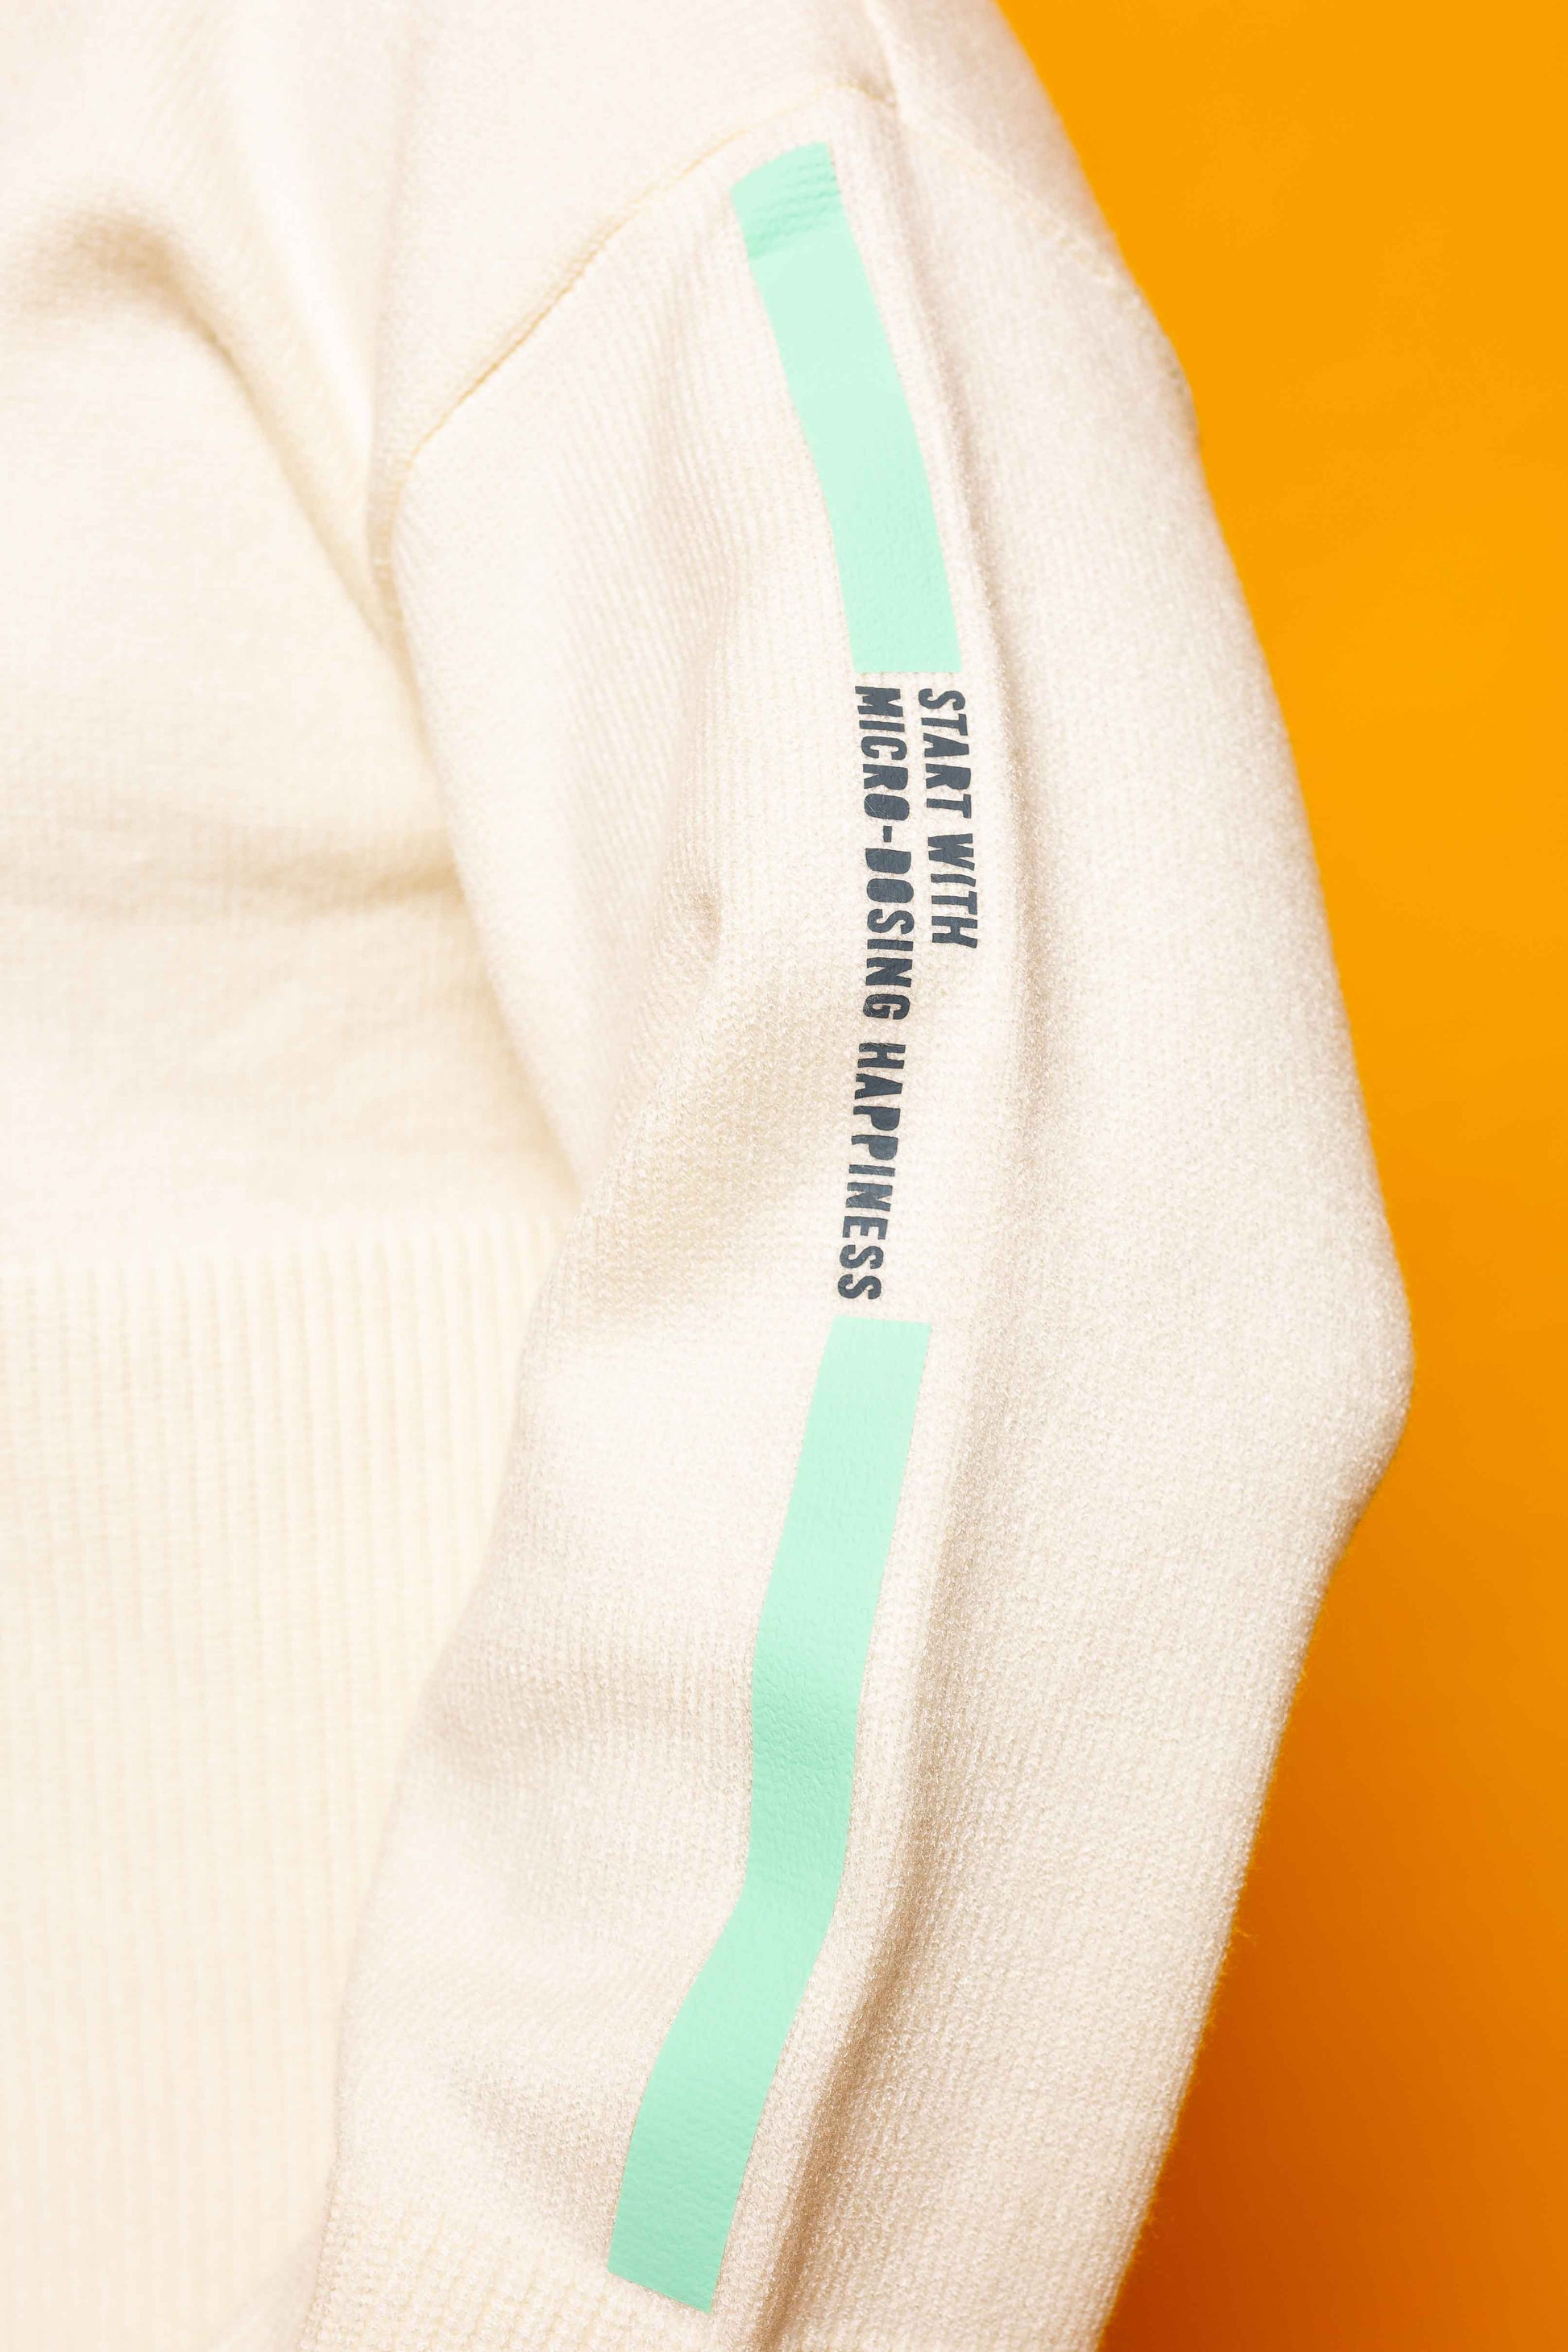 This is The Remix Jumper MICRO-DOSING HAPINESS - 70's Ribbed Boat Neck Jumper In Cream